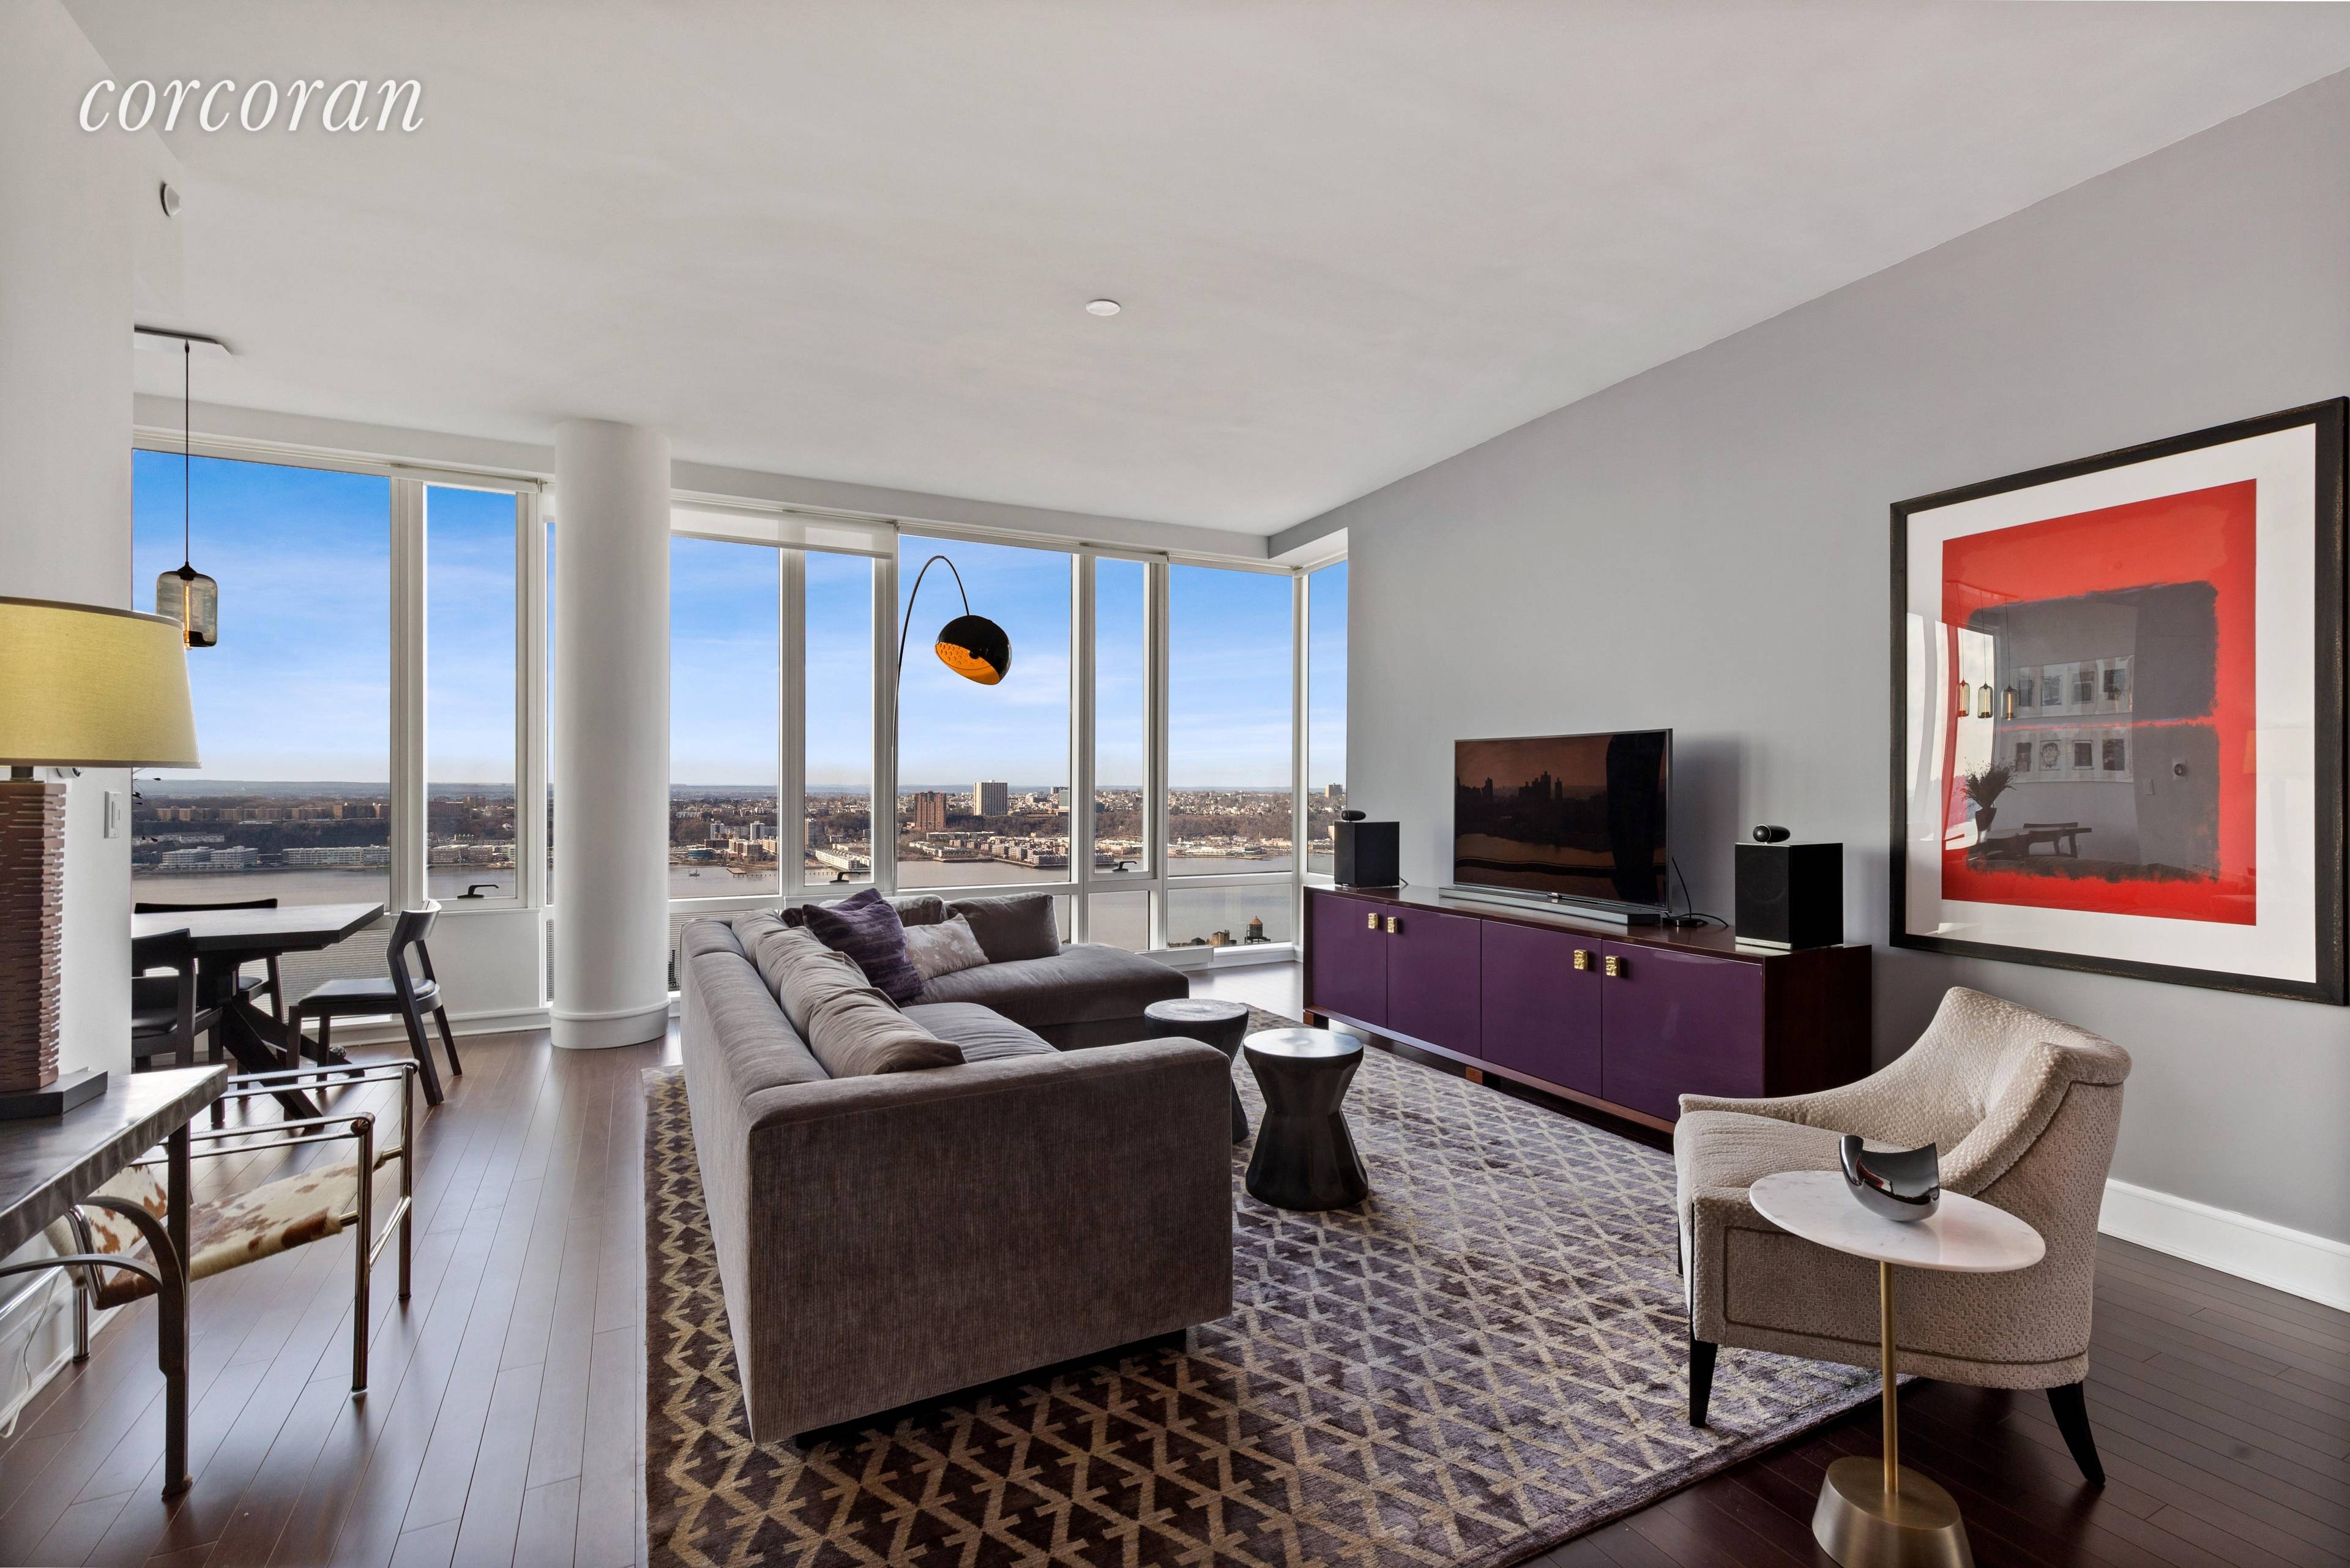 A rare 28th floor Upper West Side 3 bedroom plus home office with full bath condominium boasting the views you've been dreaming of awaits you at The Ariel West Condominium ...